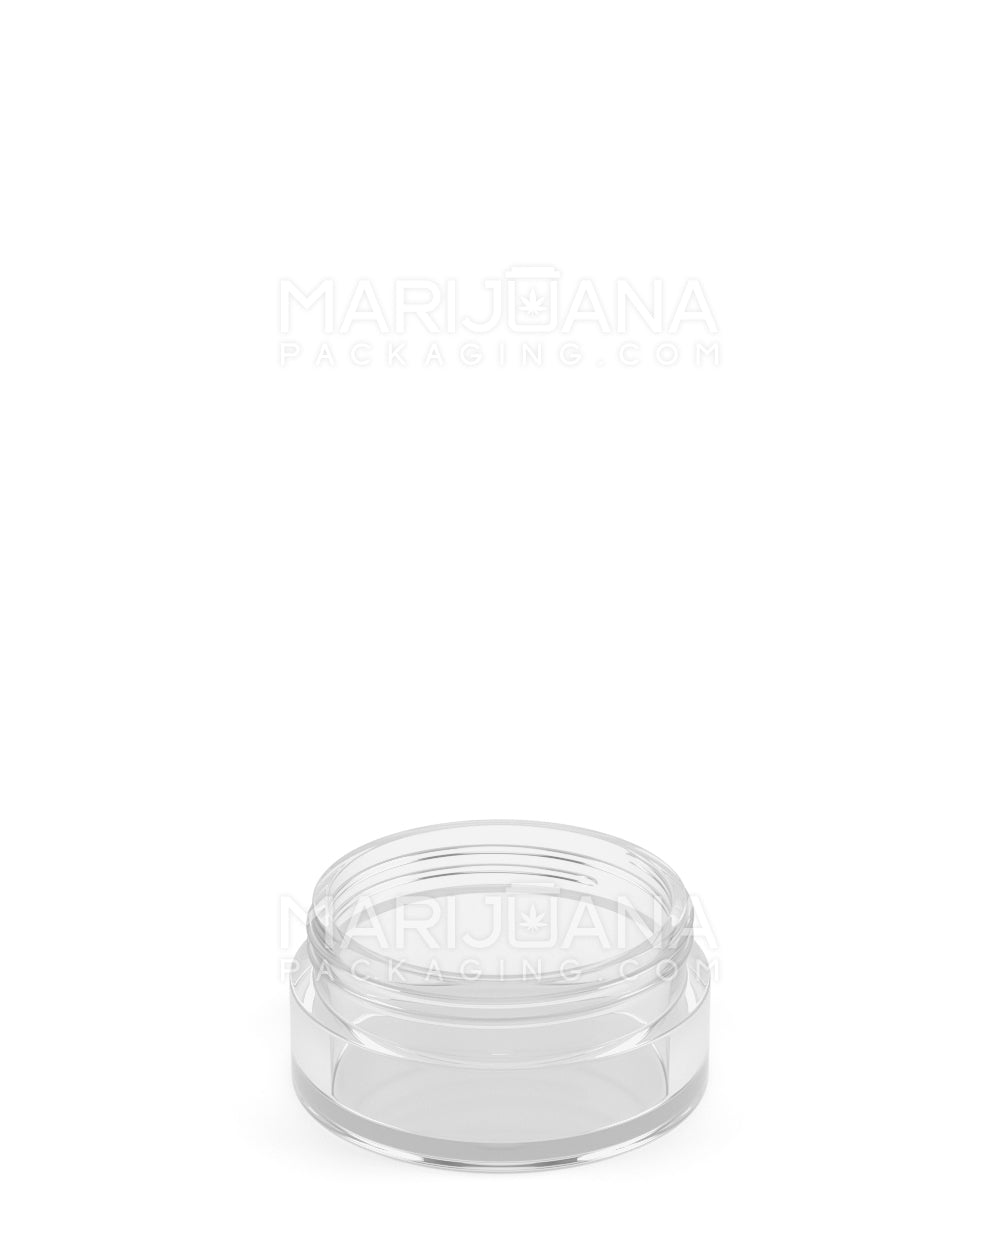 Clear Concentrate Containers w/ Screw Top Cap | 7mL - Acrylic - 200 Count - 5